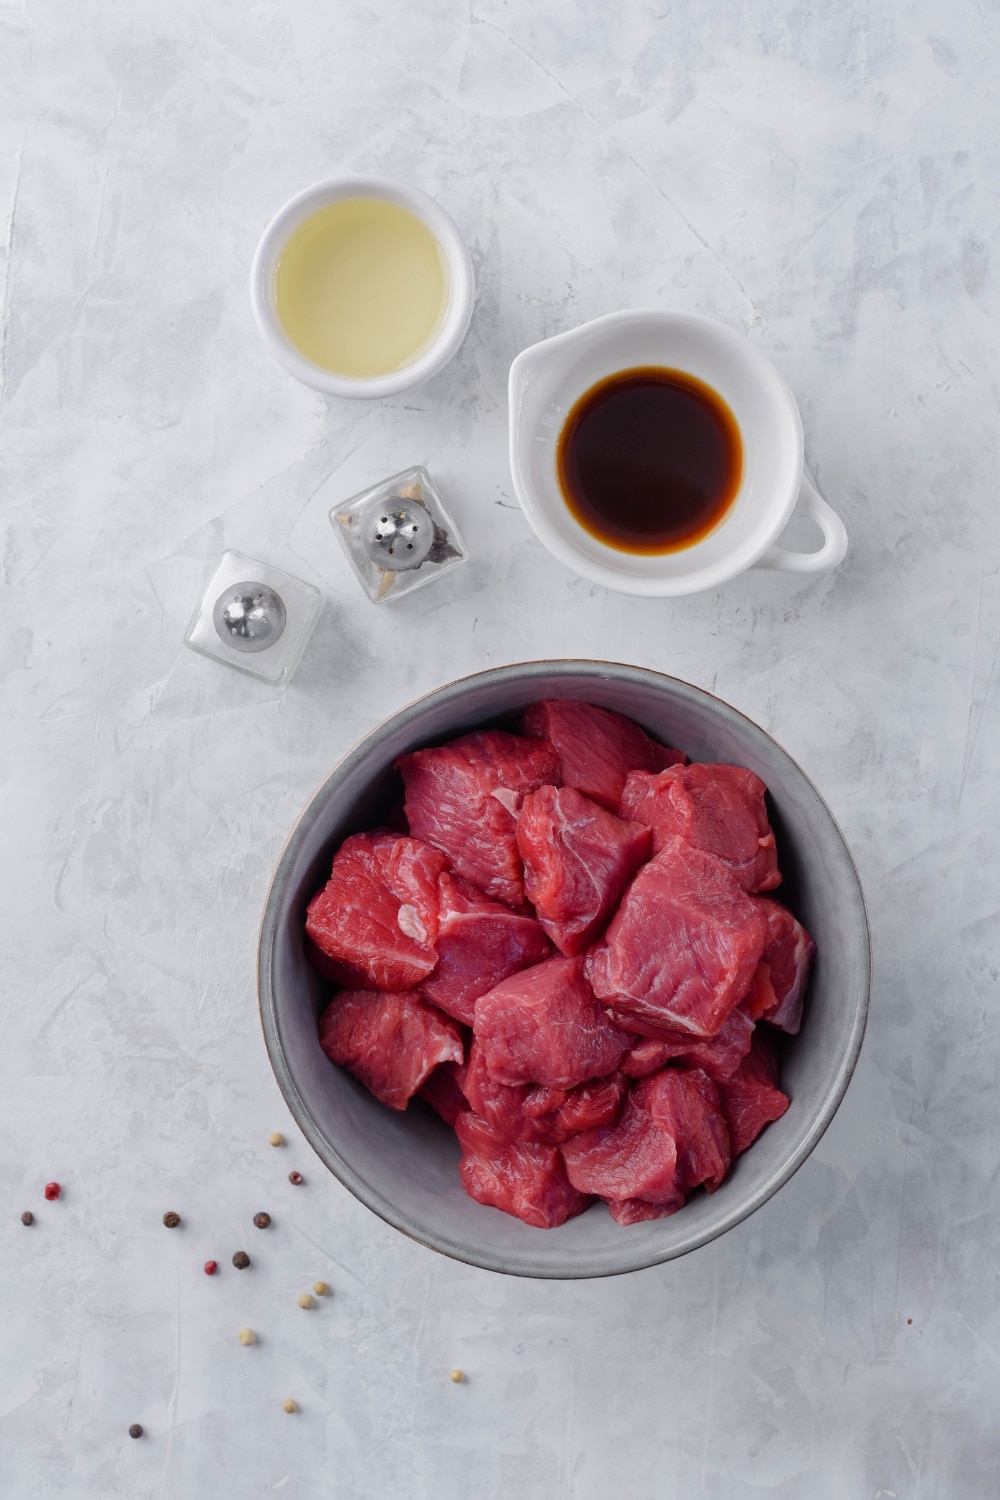 A bowl of raw steak tips, small bowls of oil and Worcestershire sauce, and salt and pepper shakers.